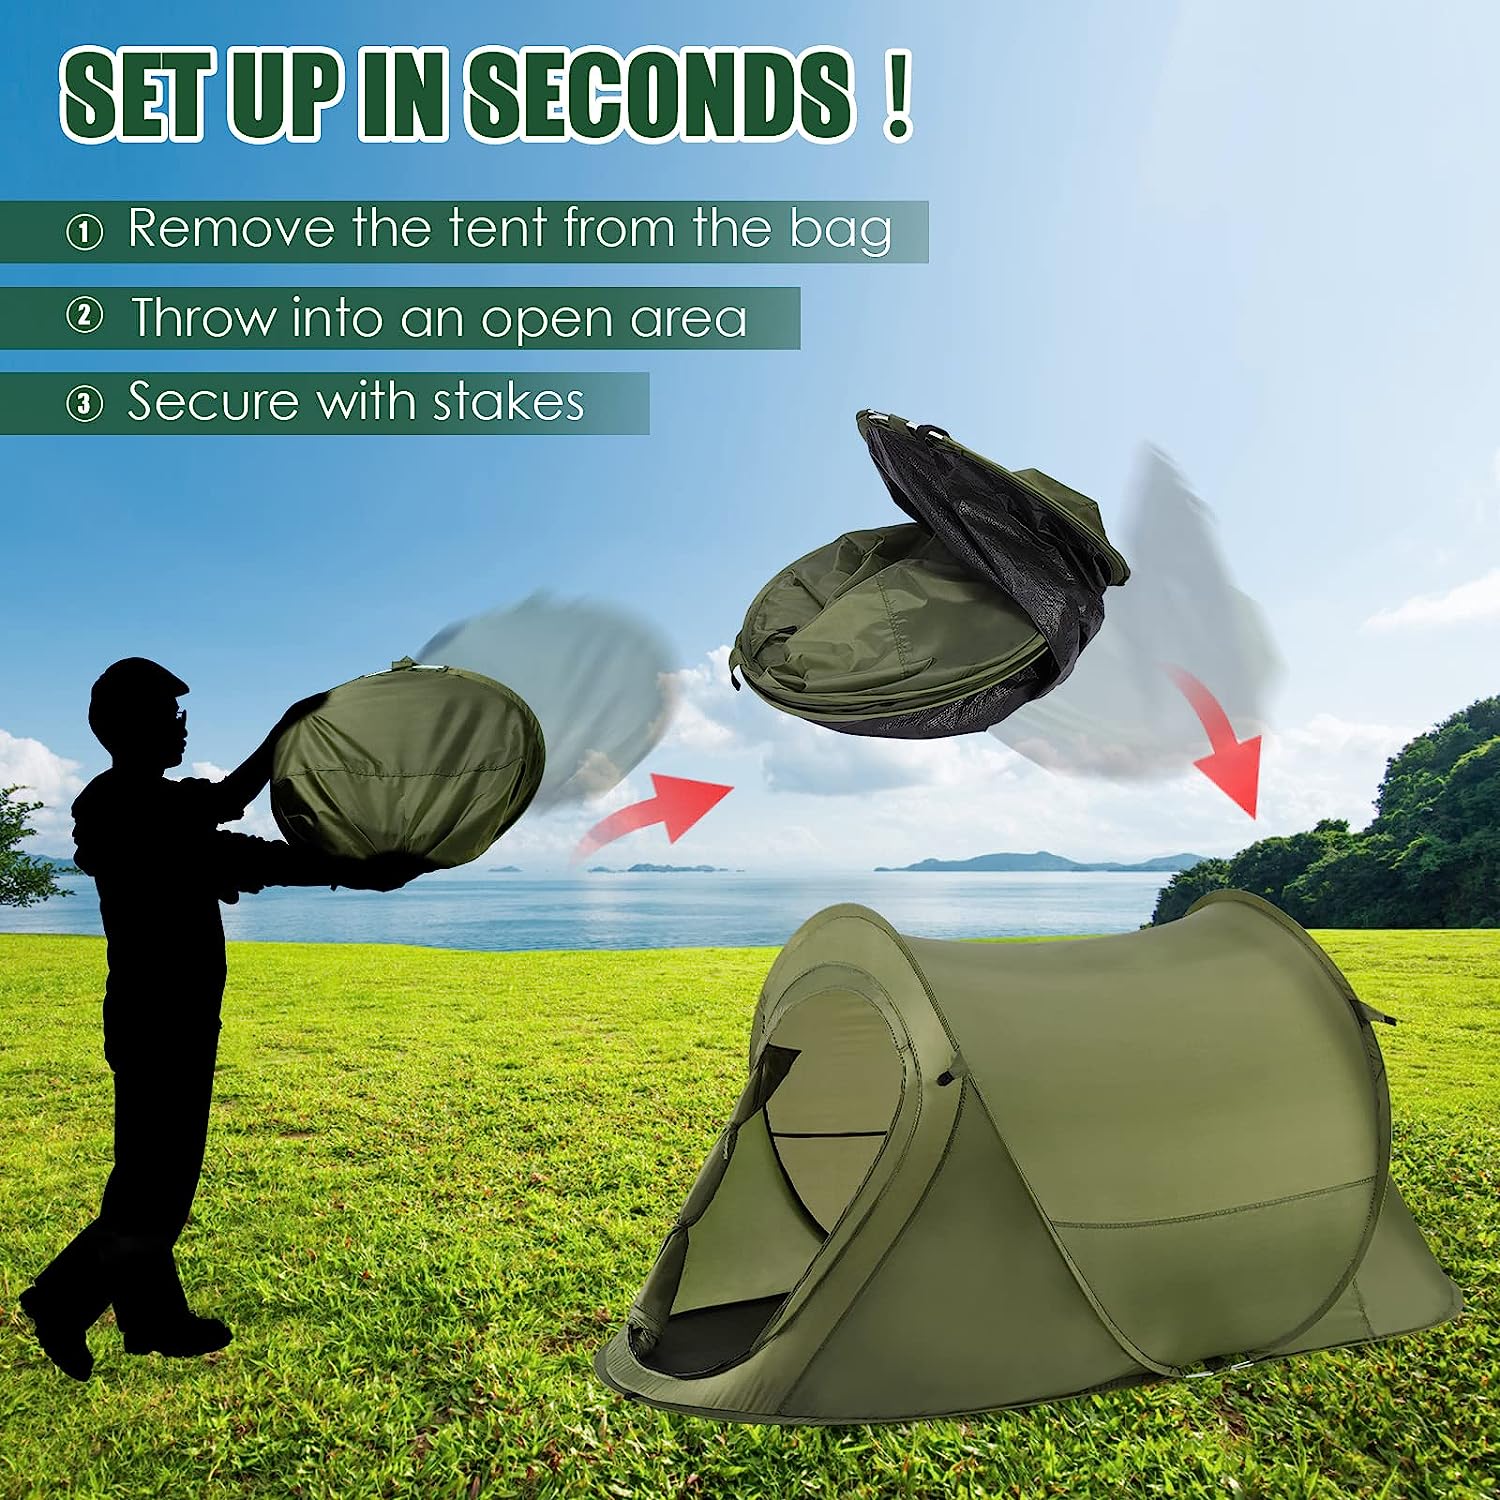 Automatic Instant Portable Tent, Pop Up Camping Tent, Suitable for 1-2 Person, 2 Doors and Side Windows with Carry Bag, Instant Pop up Beach Tent